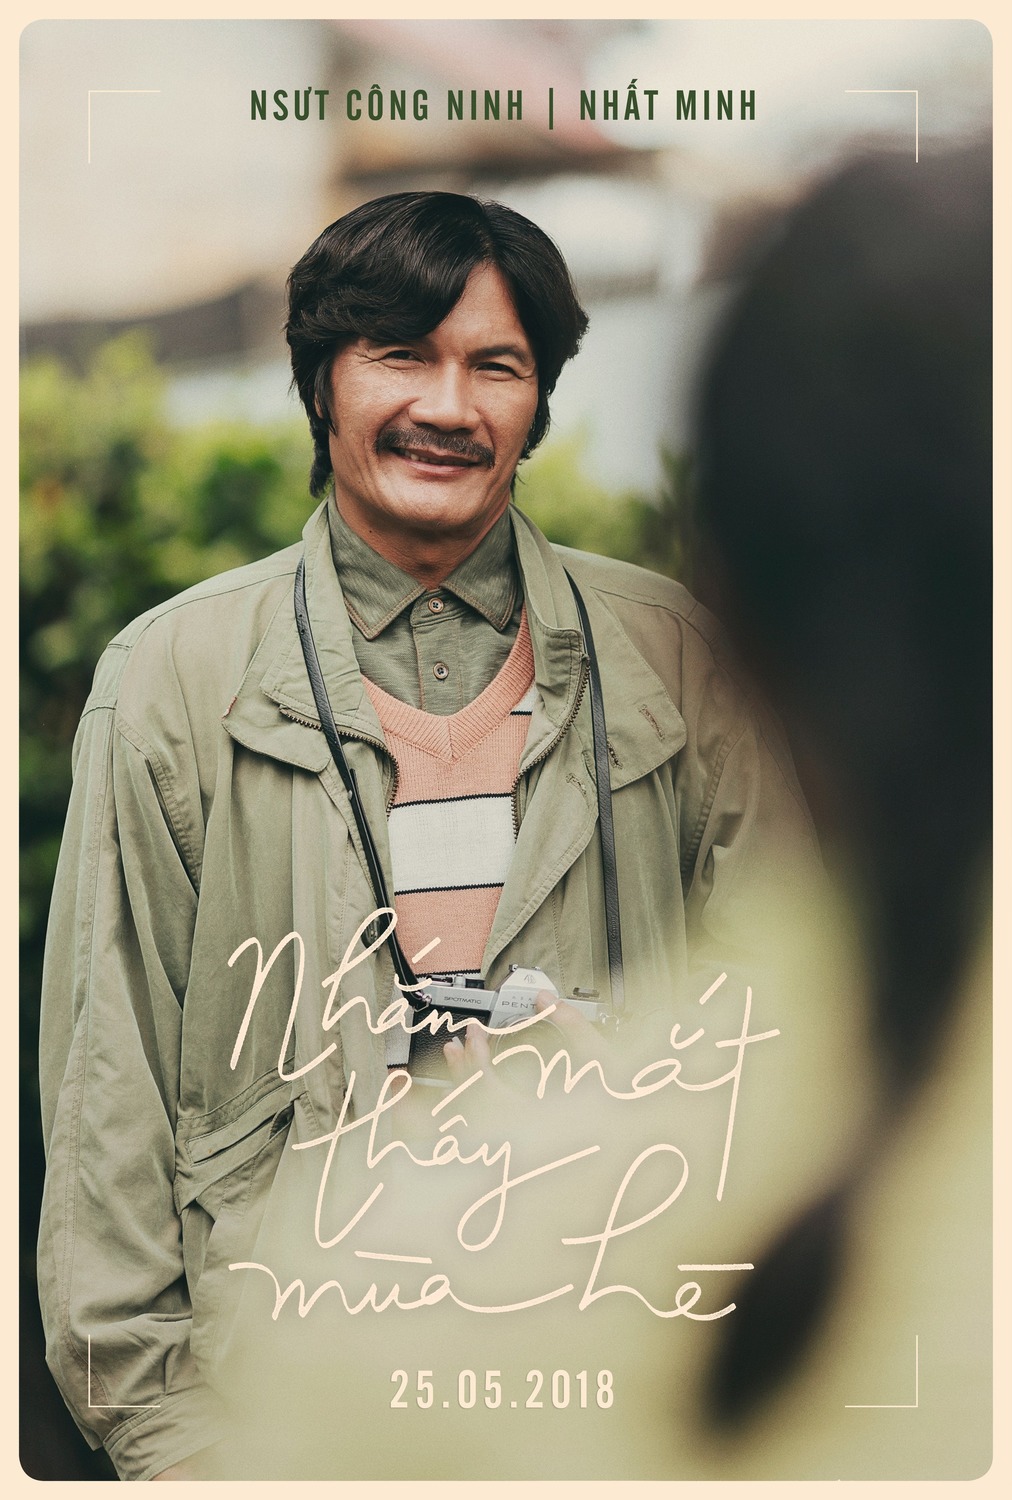 Extra Large Movie Poster Image for Nham Mat Thay Mua He (#10 of 16)